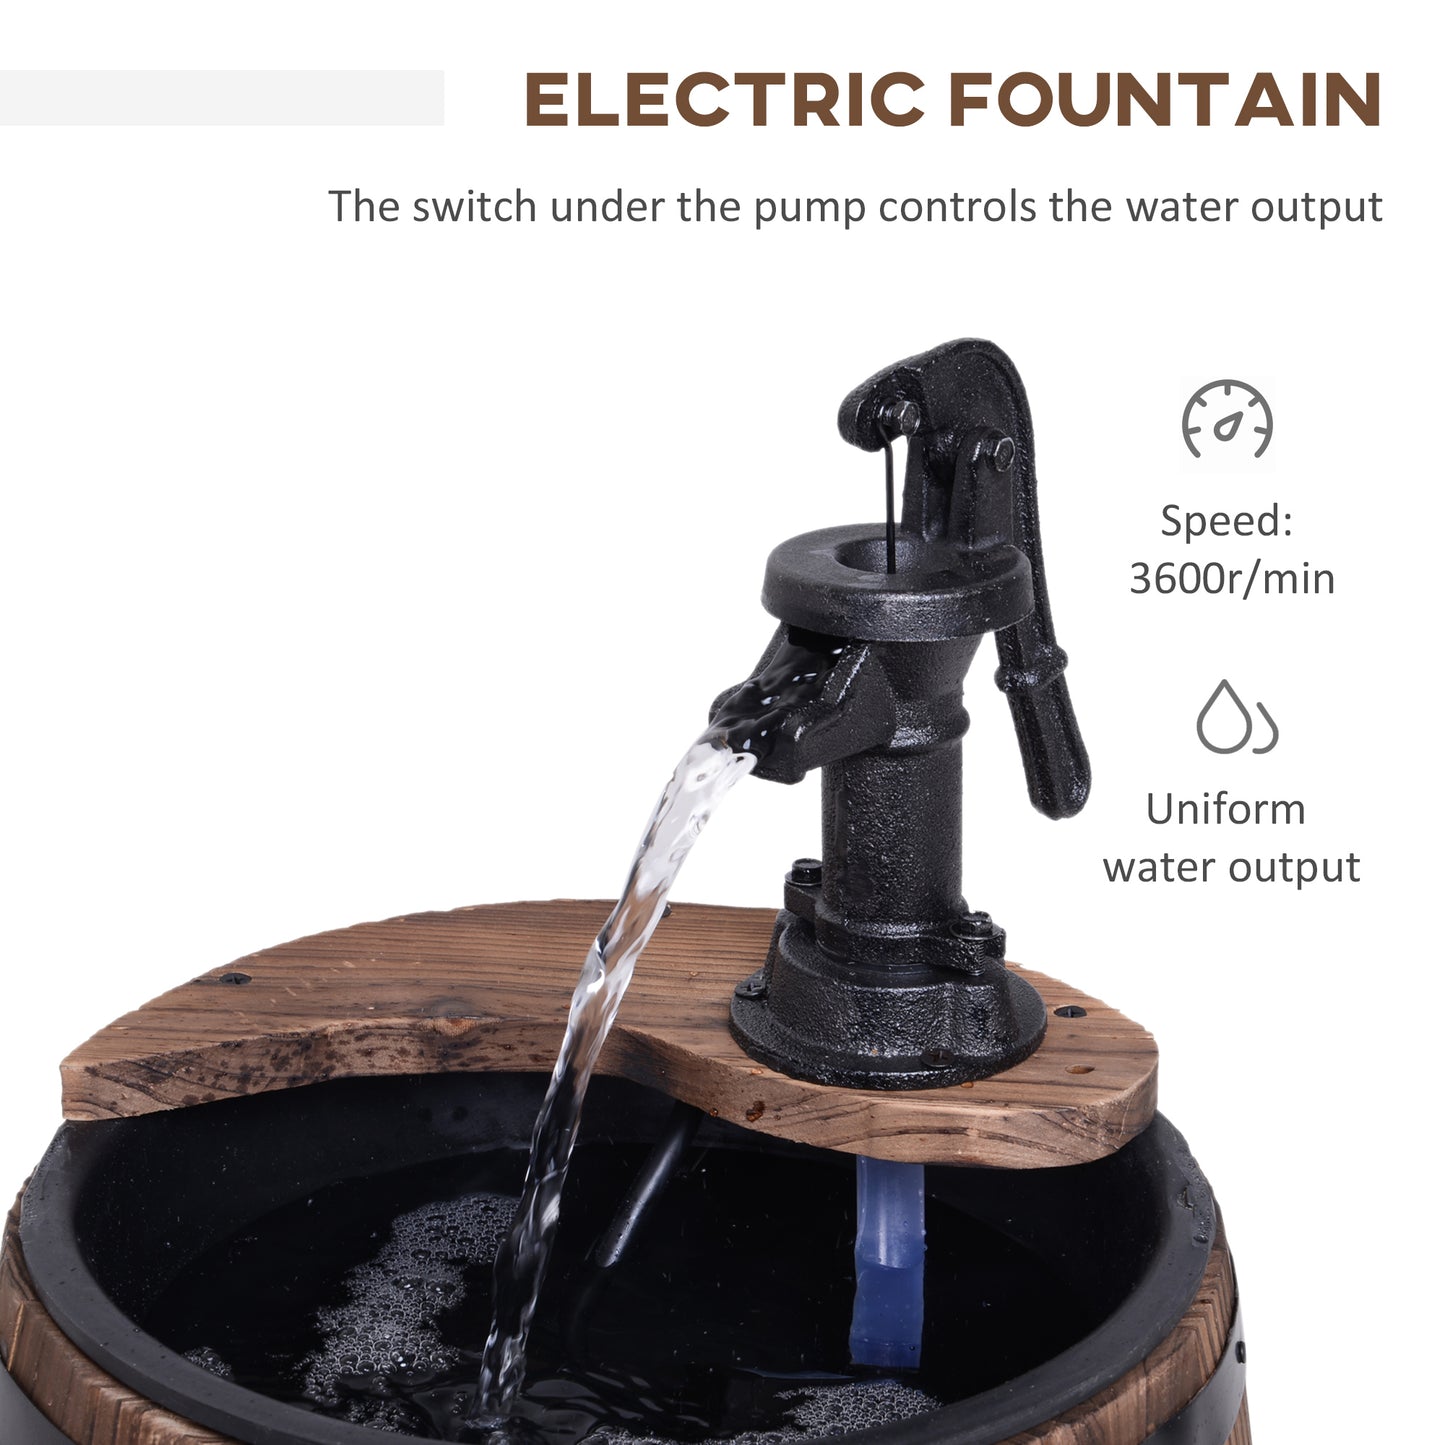 Wooden Outdoor Fountain, Electrical Barrel Waterfall with 3600r/min Speed Pump for Patio, Backyard, Carbonized at Gallery Canada